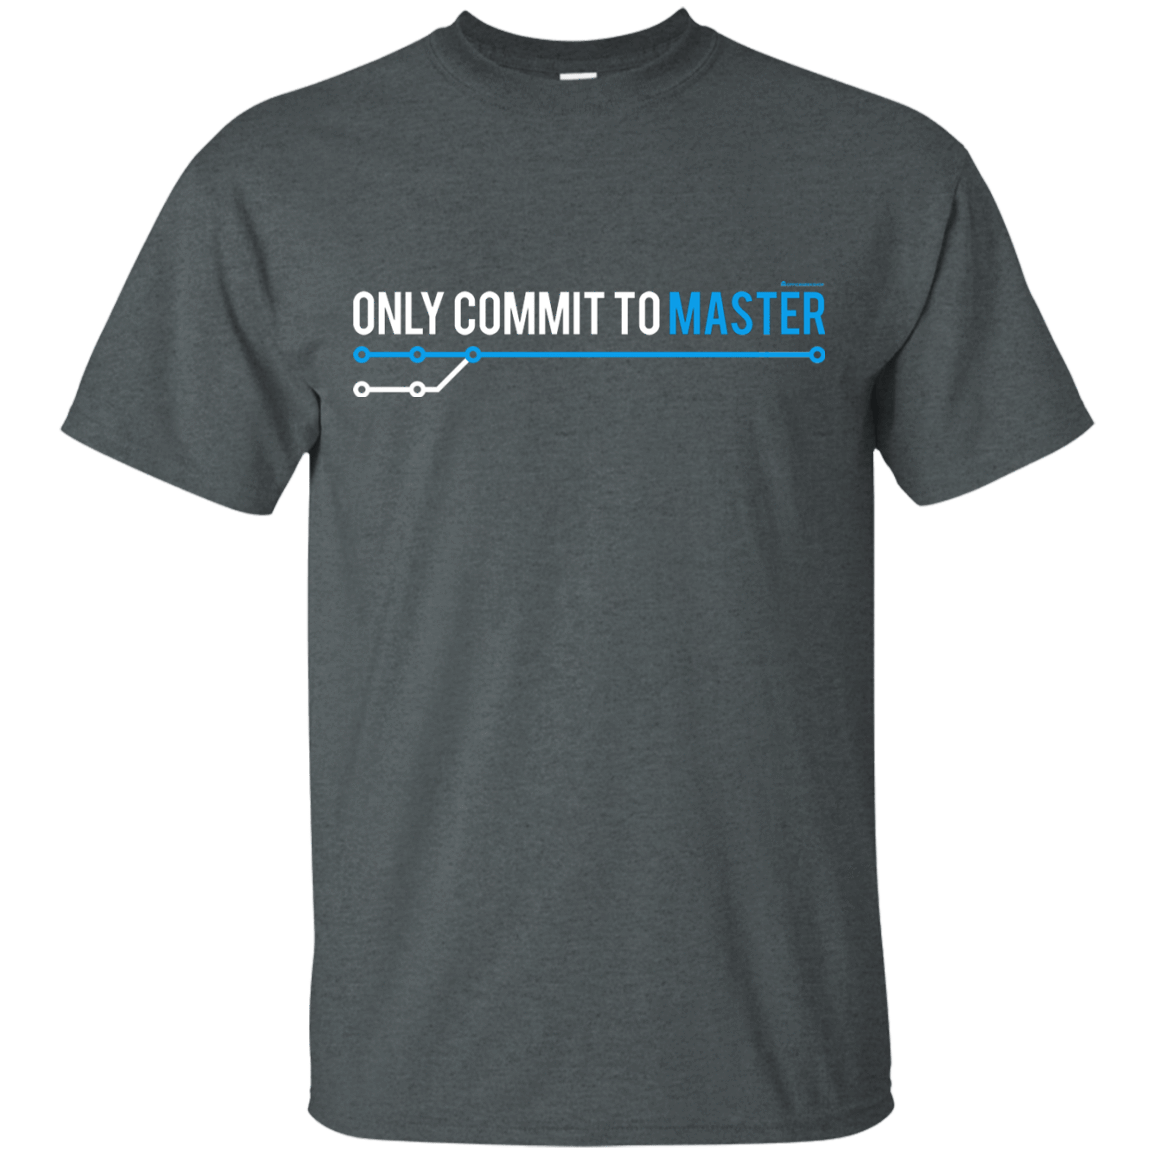 T-Shirts Dark Heather / Small Only Commit To Master T-Shirt